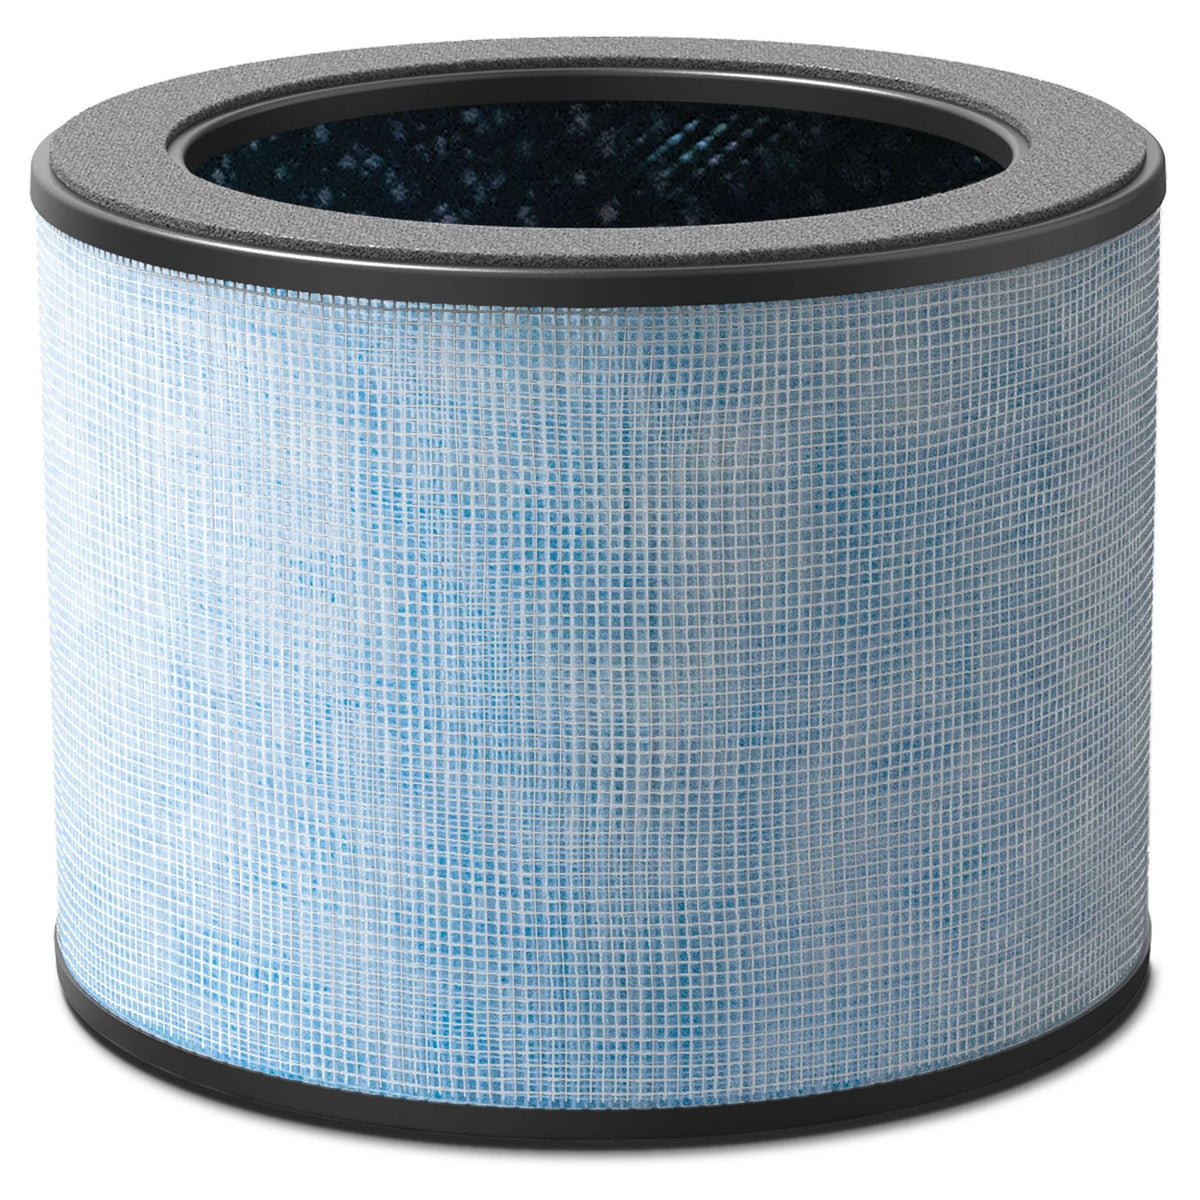 Instant 210-0061-01 F200 Air Purification Replacement Filter, Medium